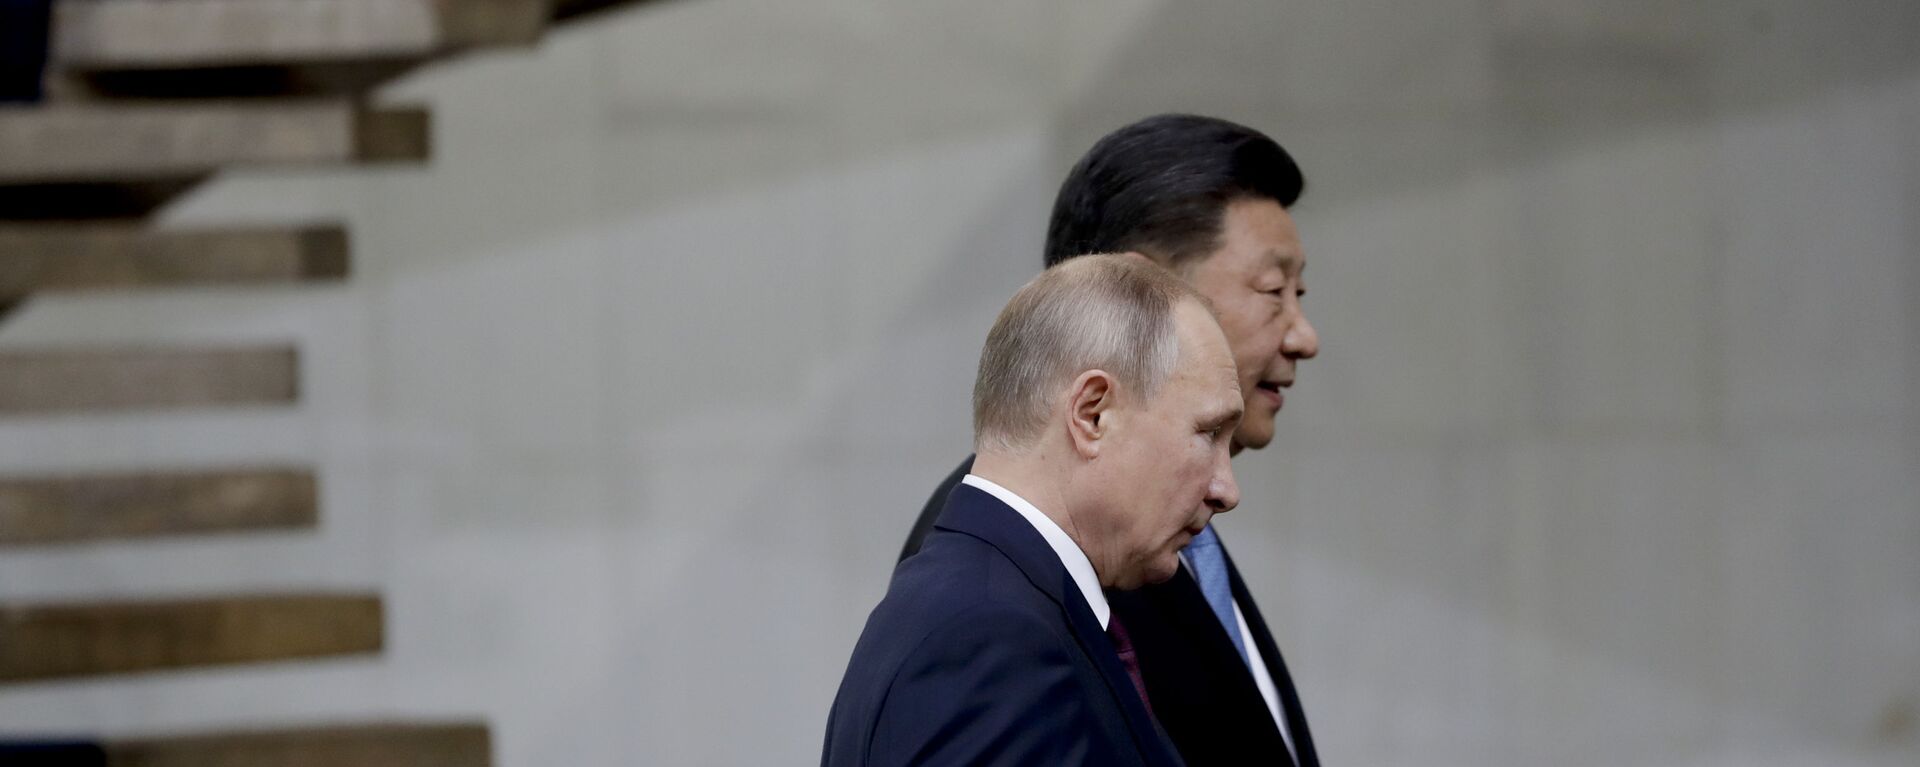 Russia's President Vladimir Putin and China's President Xi Jinping walk after the family photo of leaders of the BRICS emerging economies at the Itamaraty palace in Brasilia, Brazil, Thursday, Nov. 14, 2019 - Sputnik International, 1920, 26.08.2021